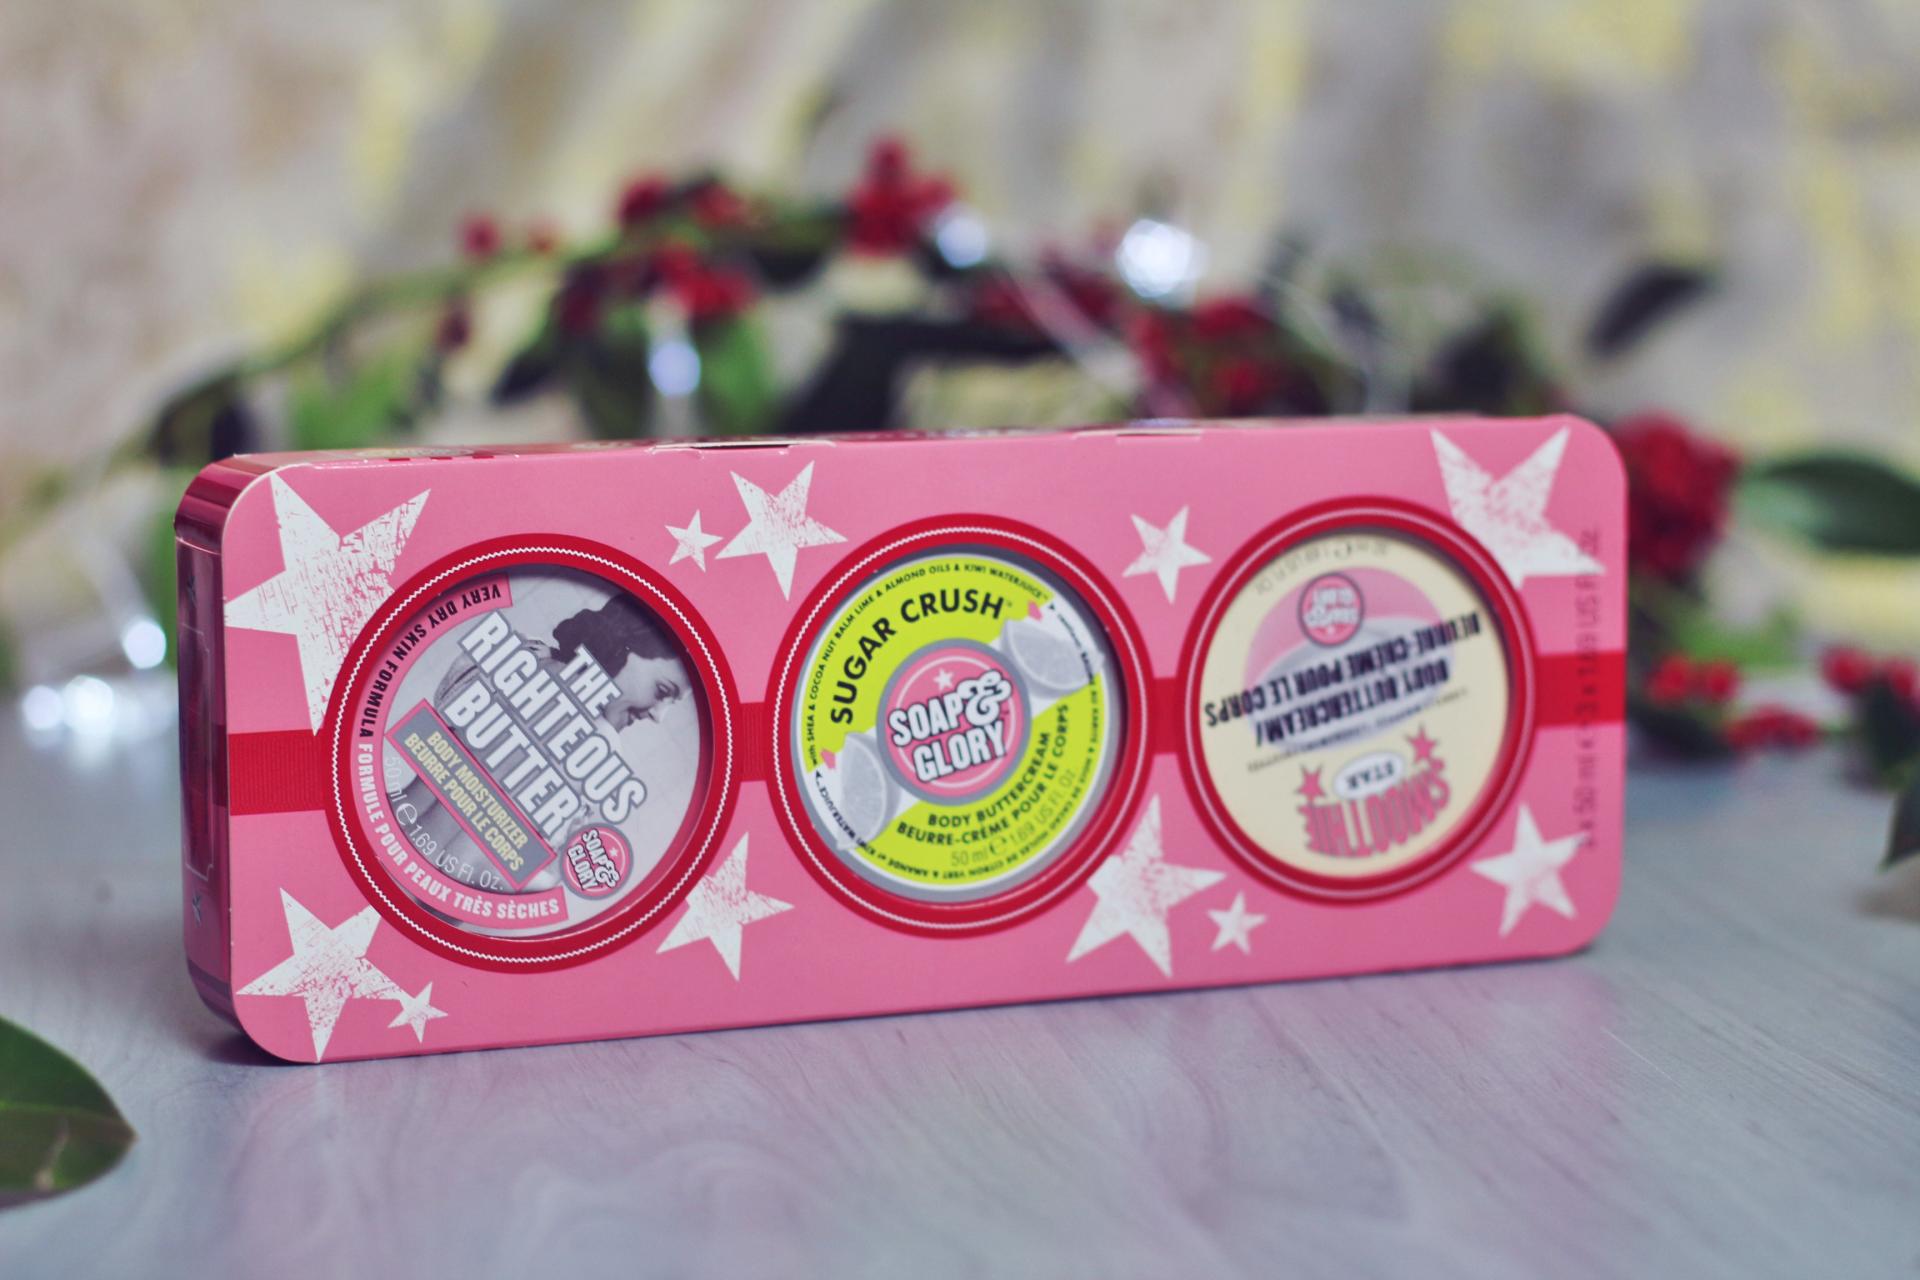 soap and glory body butter gift set